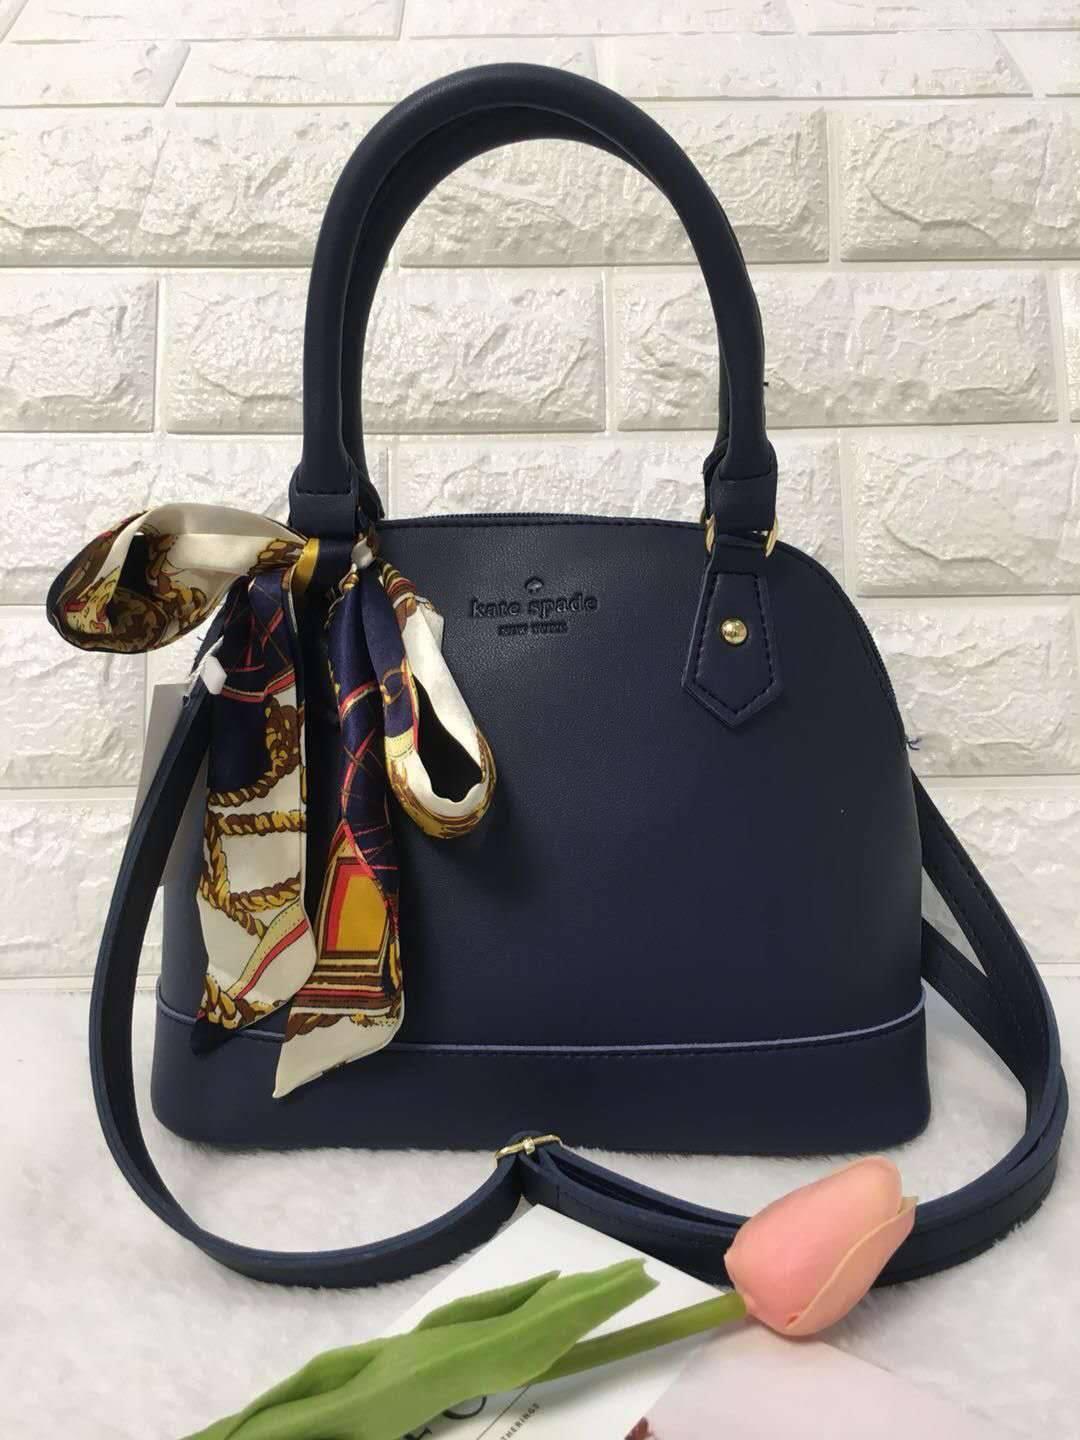 Bags for Women for sale - Womens Bags online brands, prices & reviews in Philippines | www.bagssaleusa.com